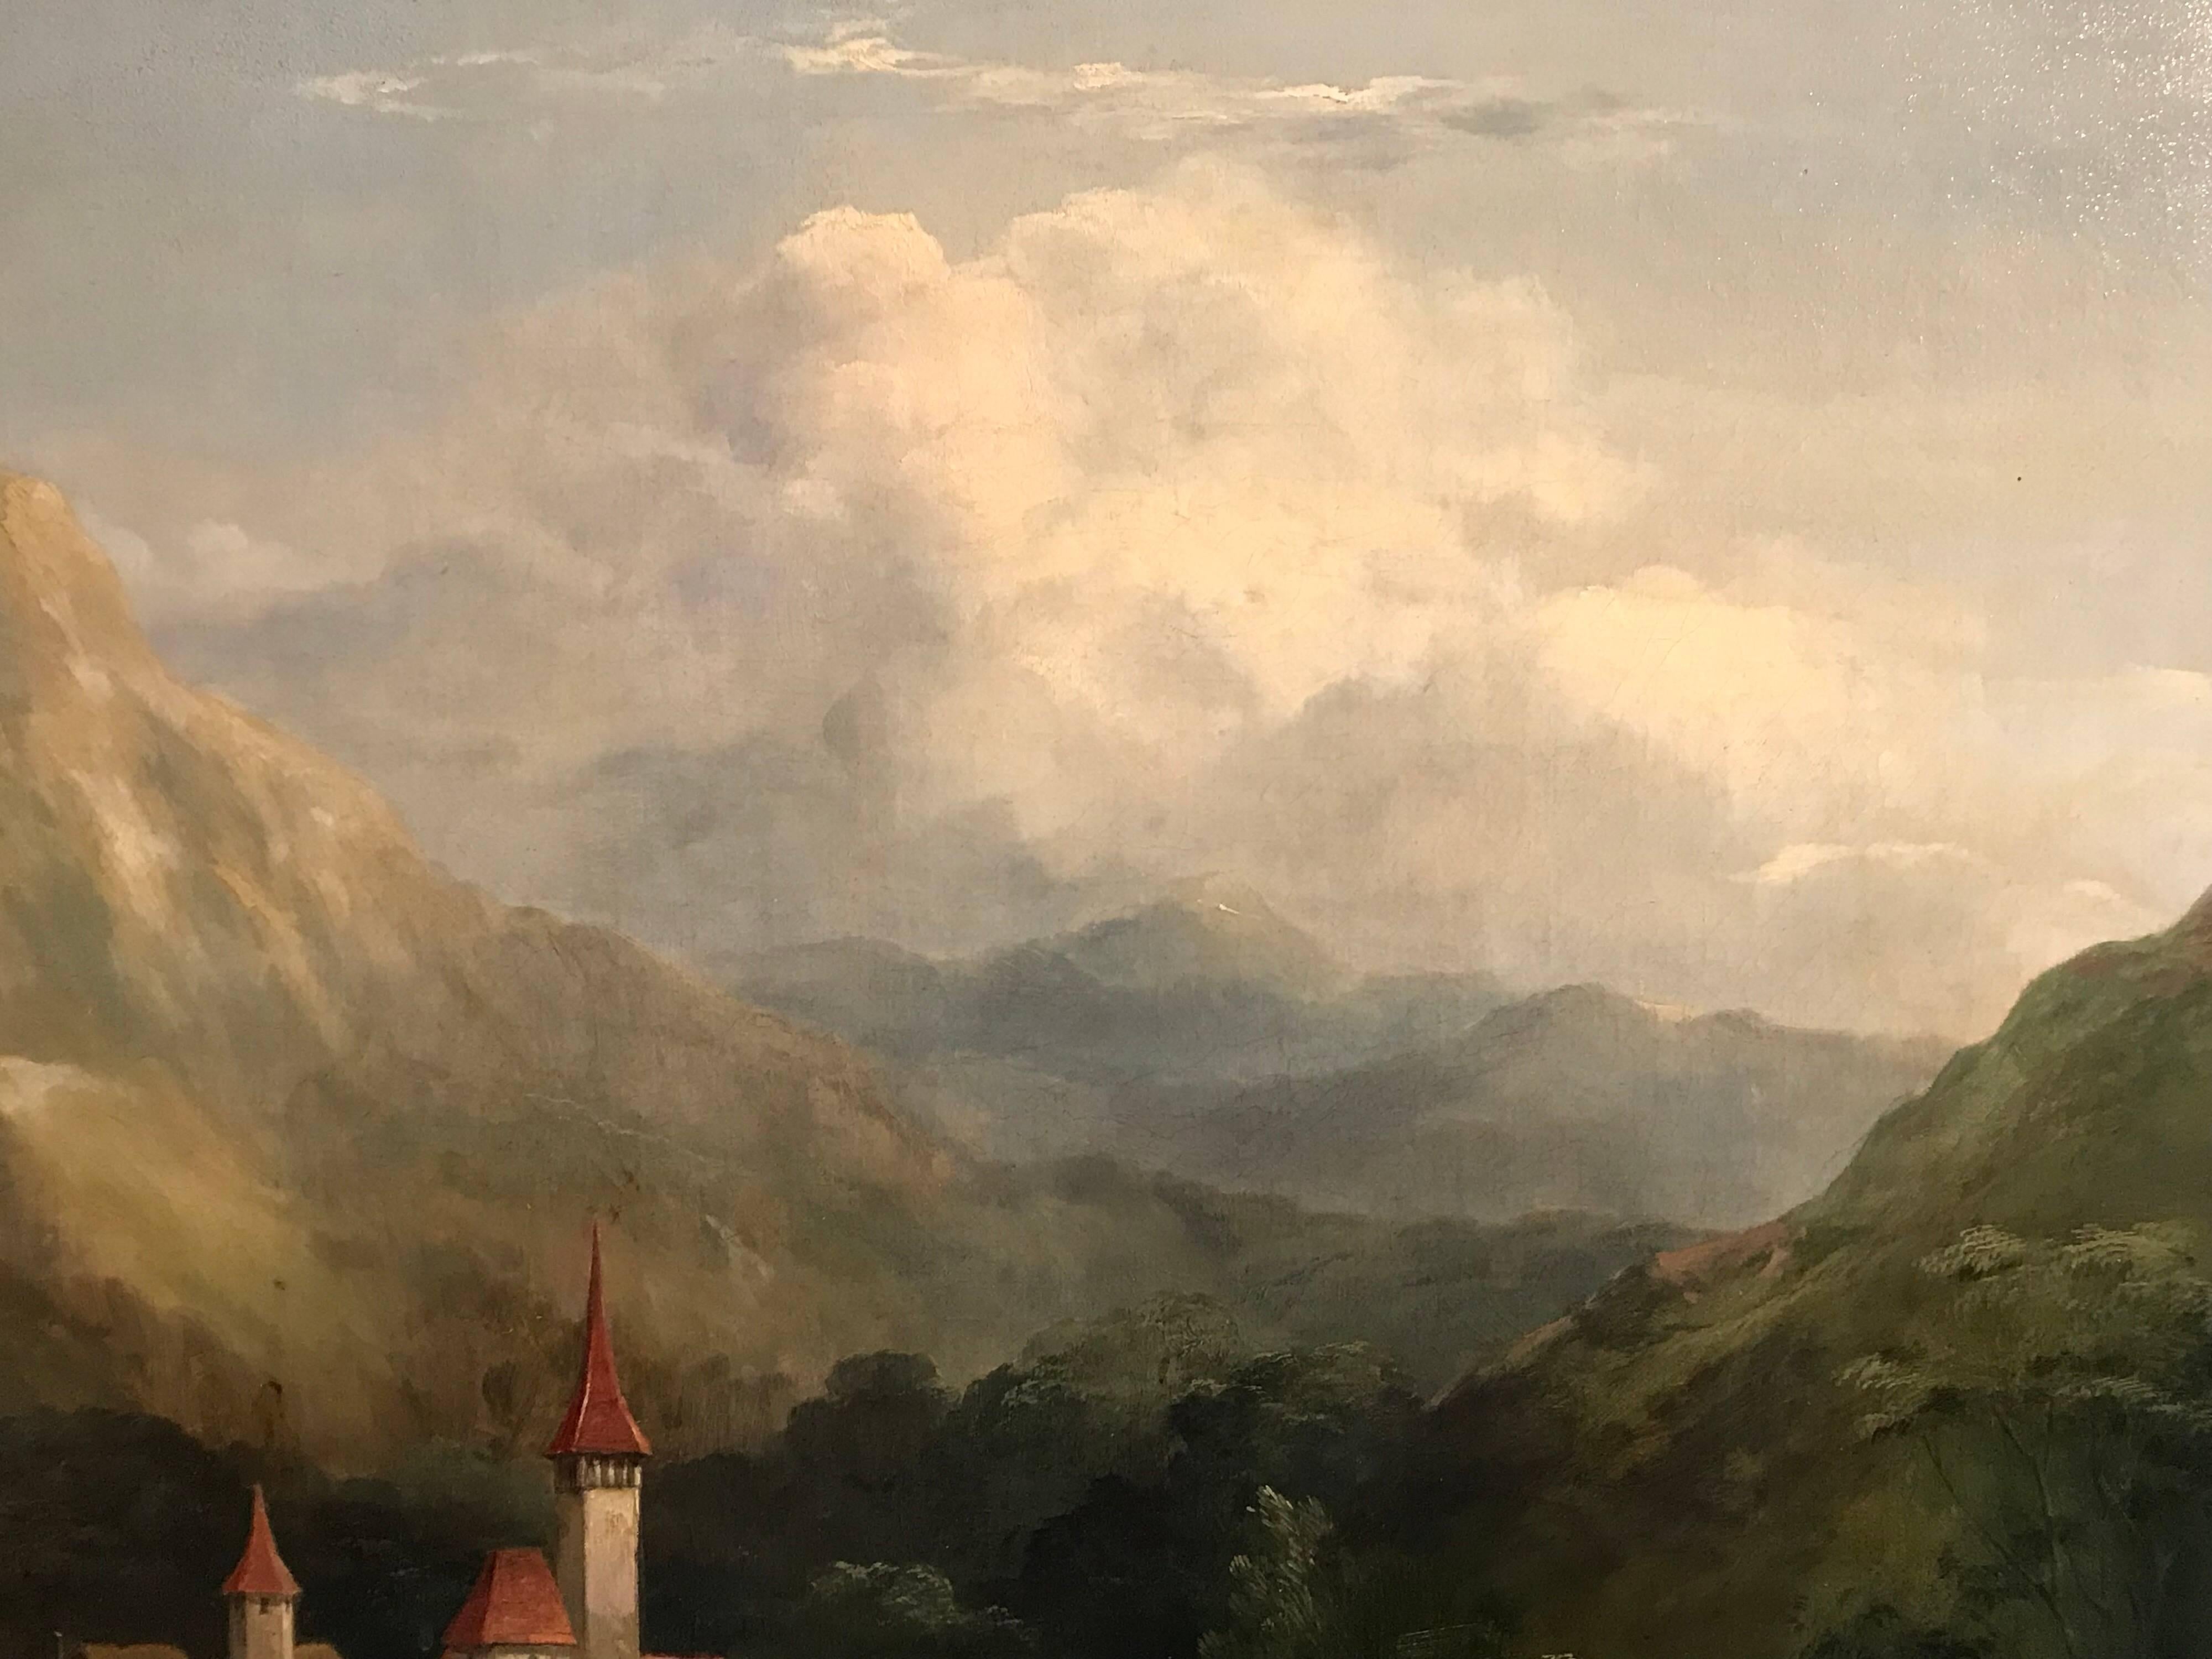 The Bavarian Landscape
German School, 19th century
oil painting on canvas, framed

framed size: 33 x 41 inches

Finely painted, very large scale original German oil painting on canvas, depicting this mountainous valley, with ancient buildings,